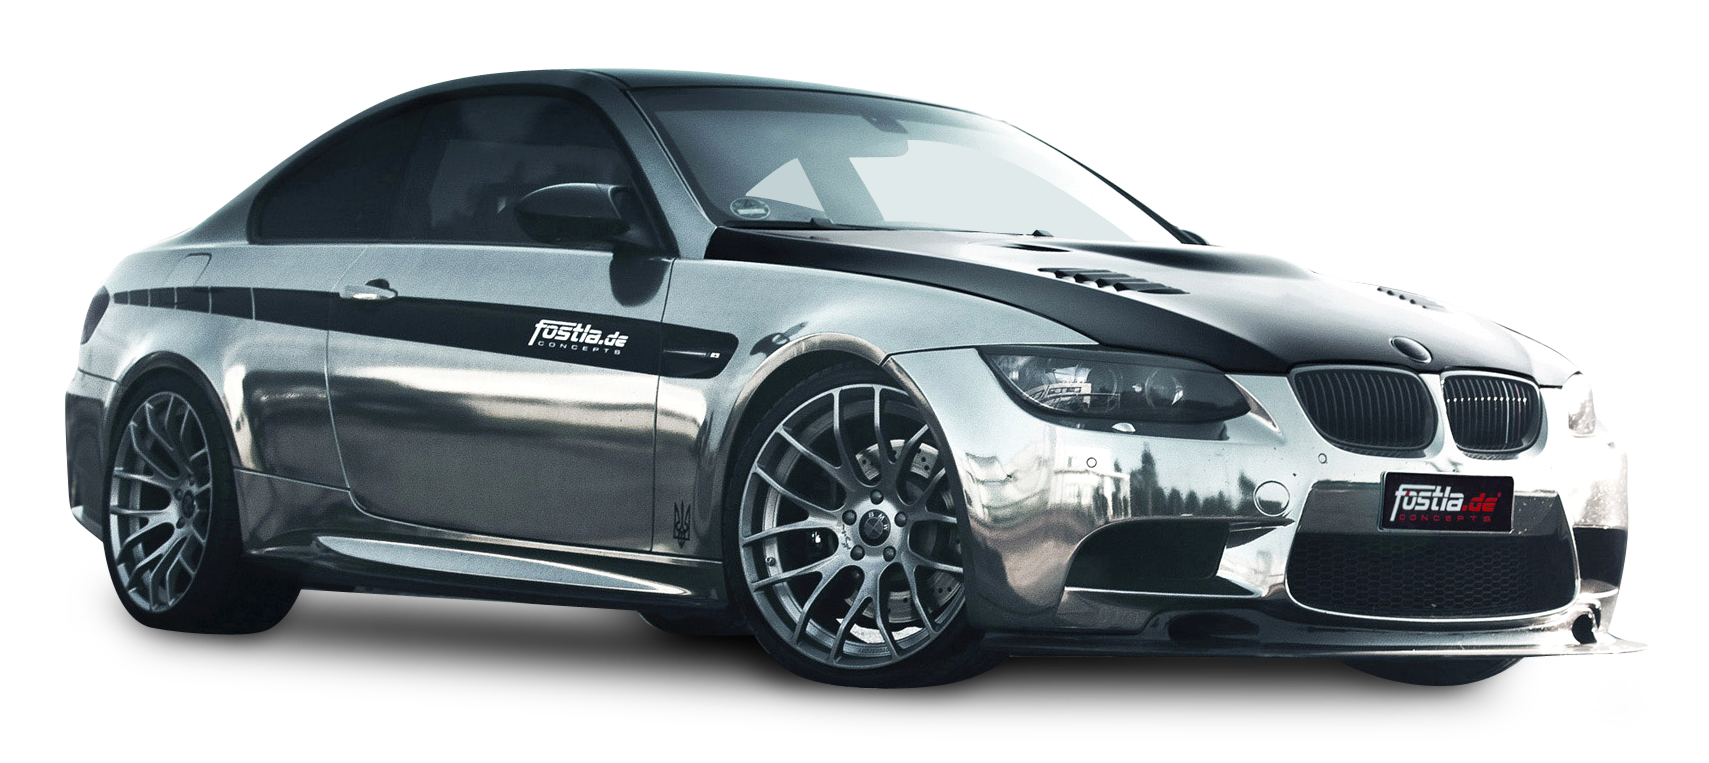 Silver BMW M3 Coupe Car PNG Image